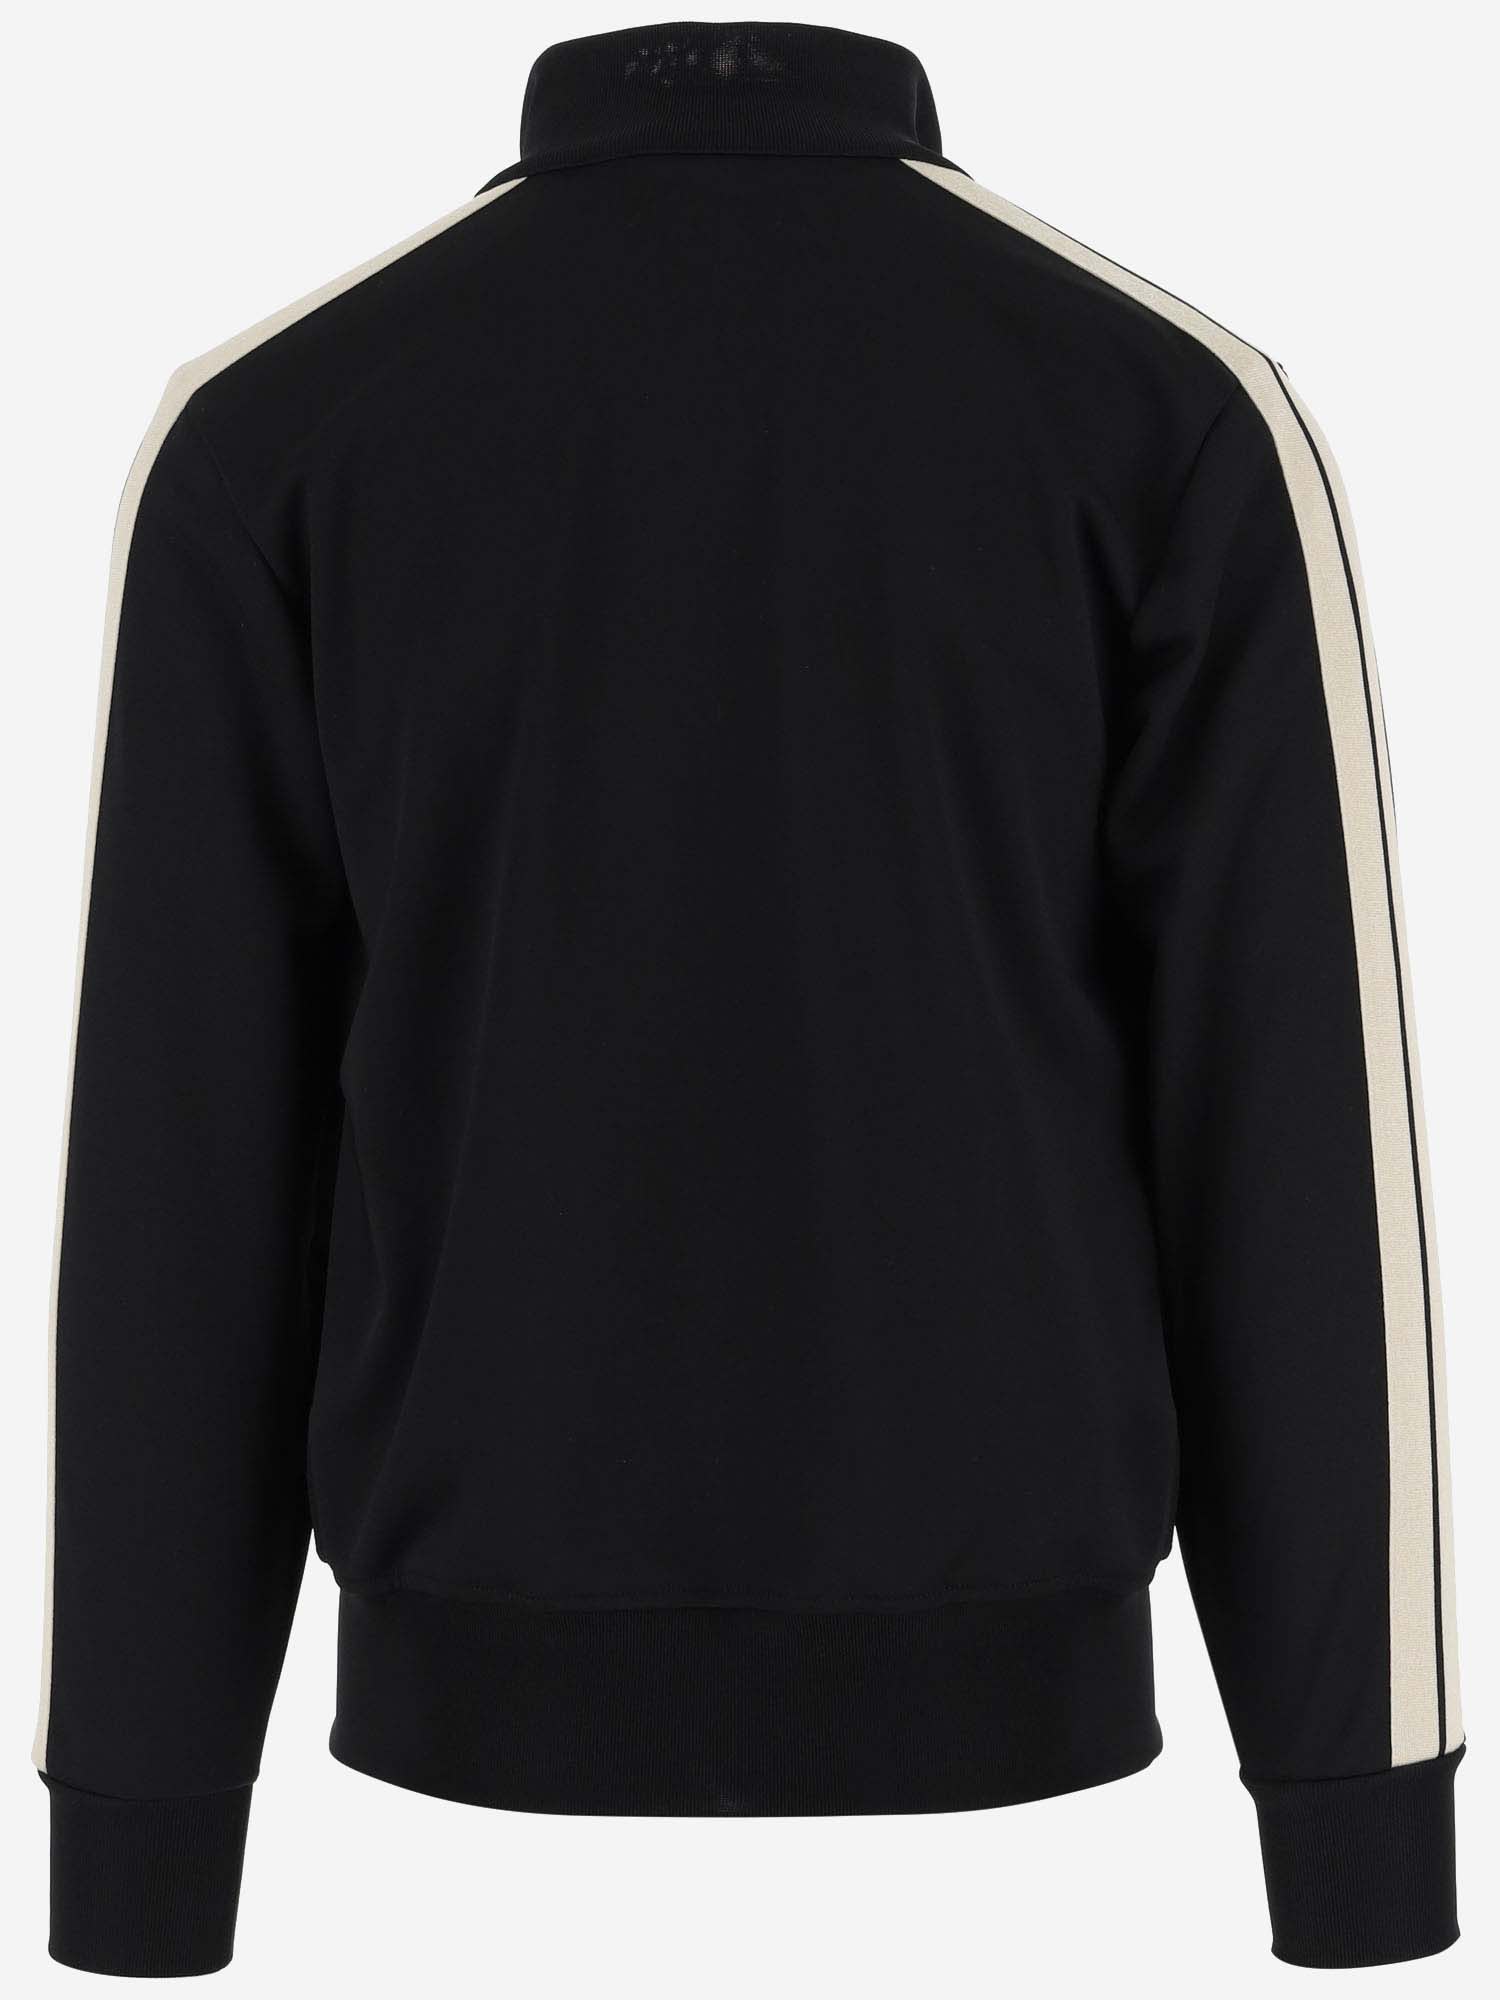 Shop Palm Angels Technical Fabric Sports Jacket In Black